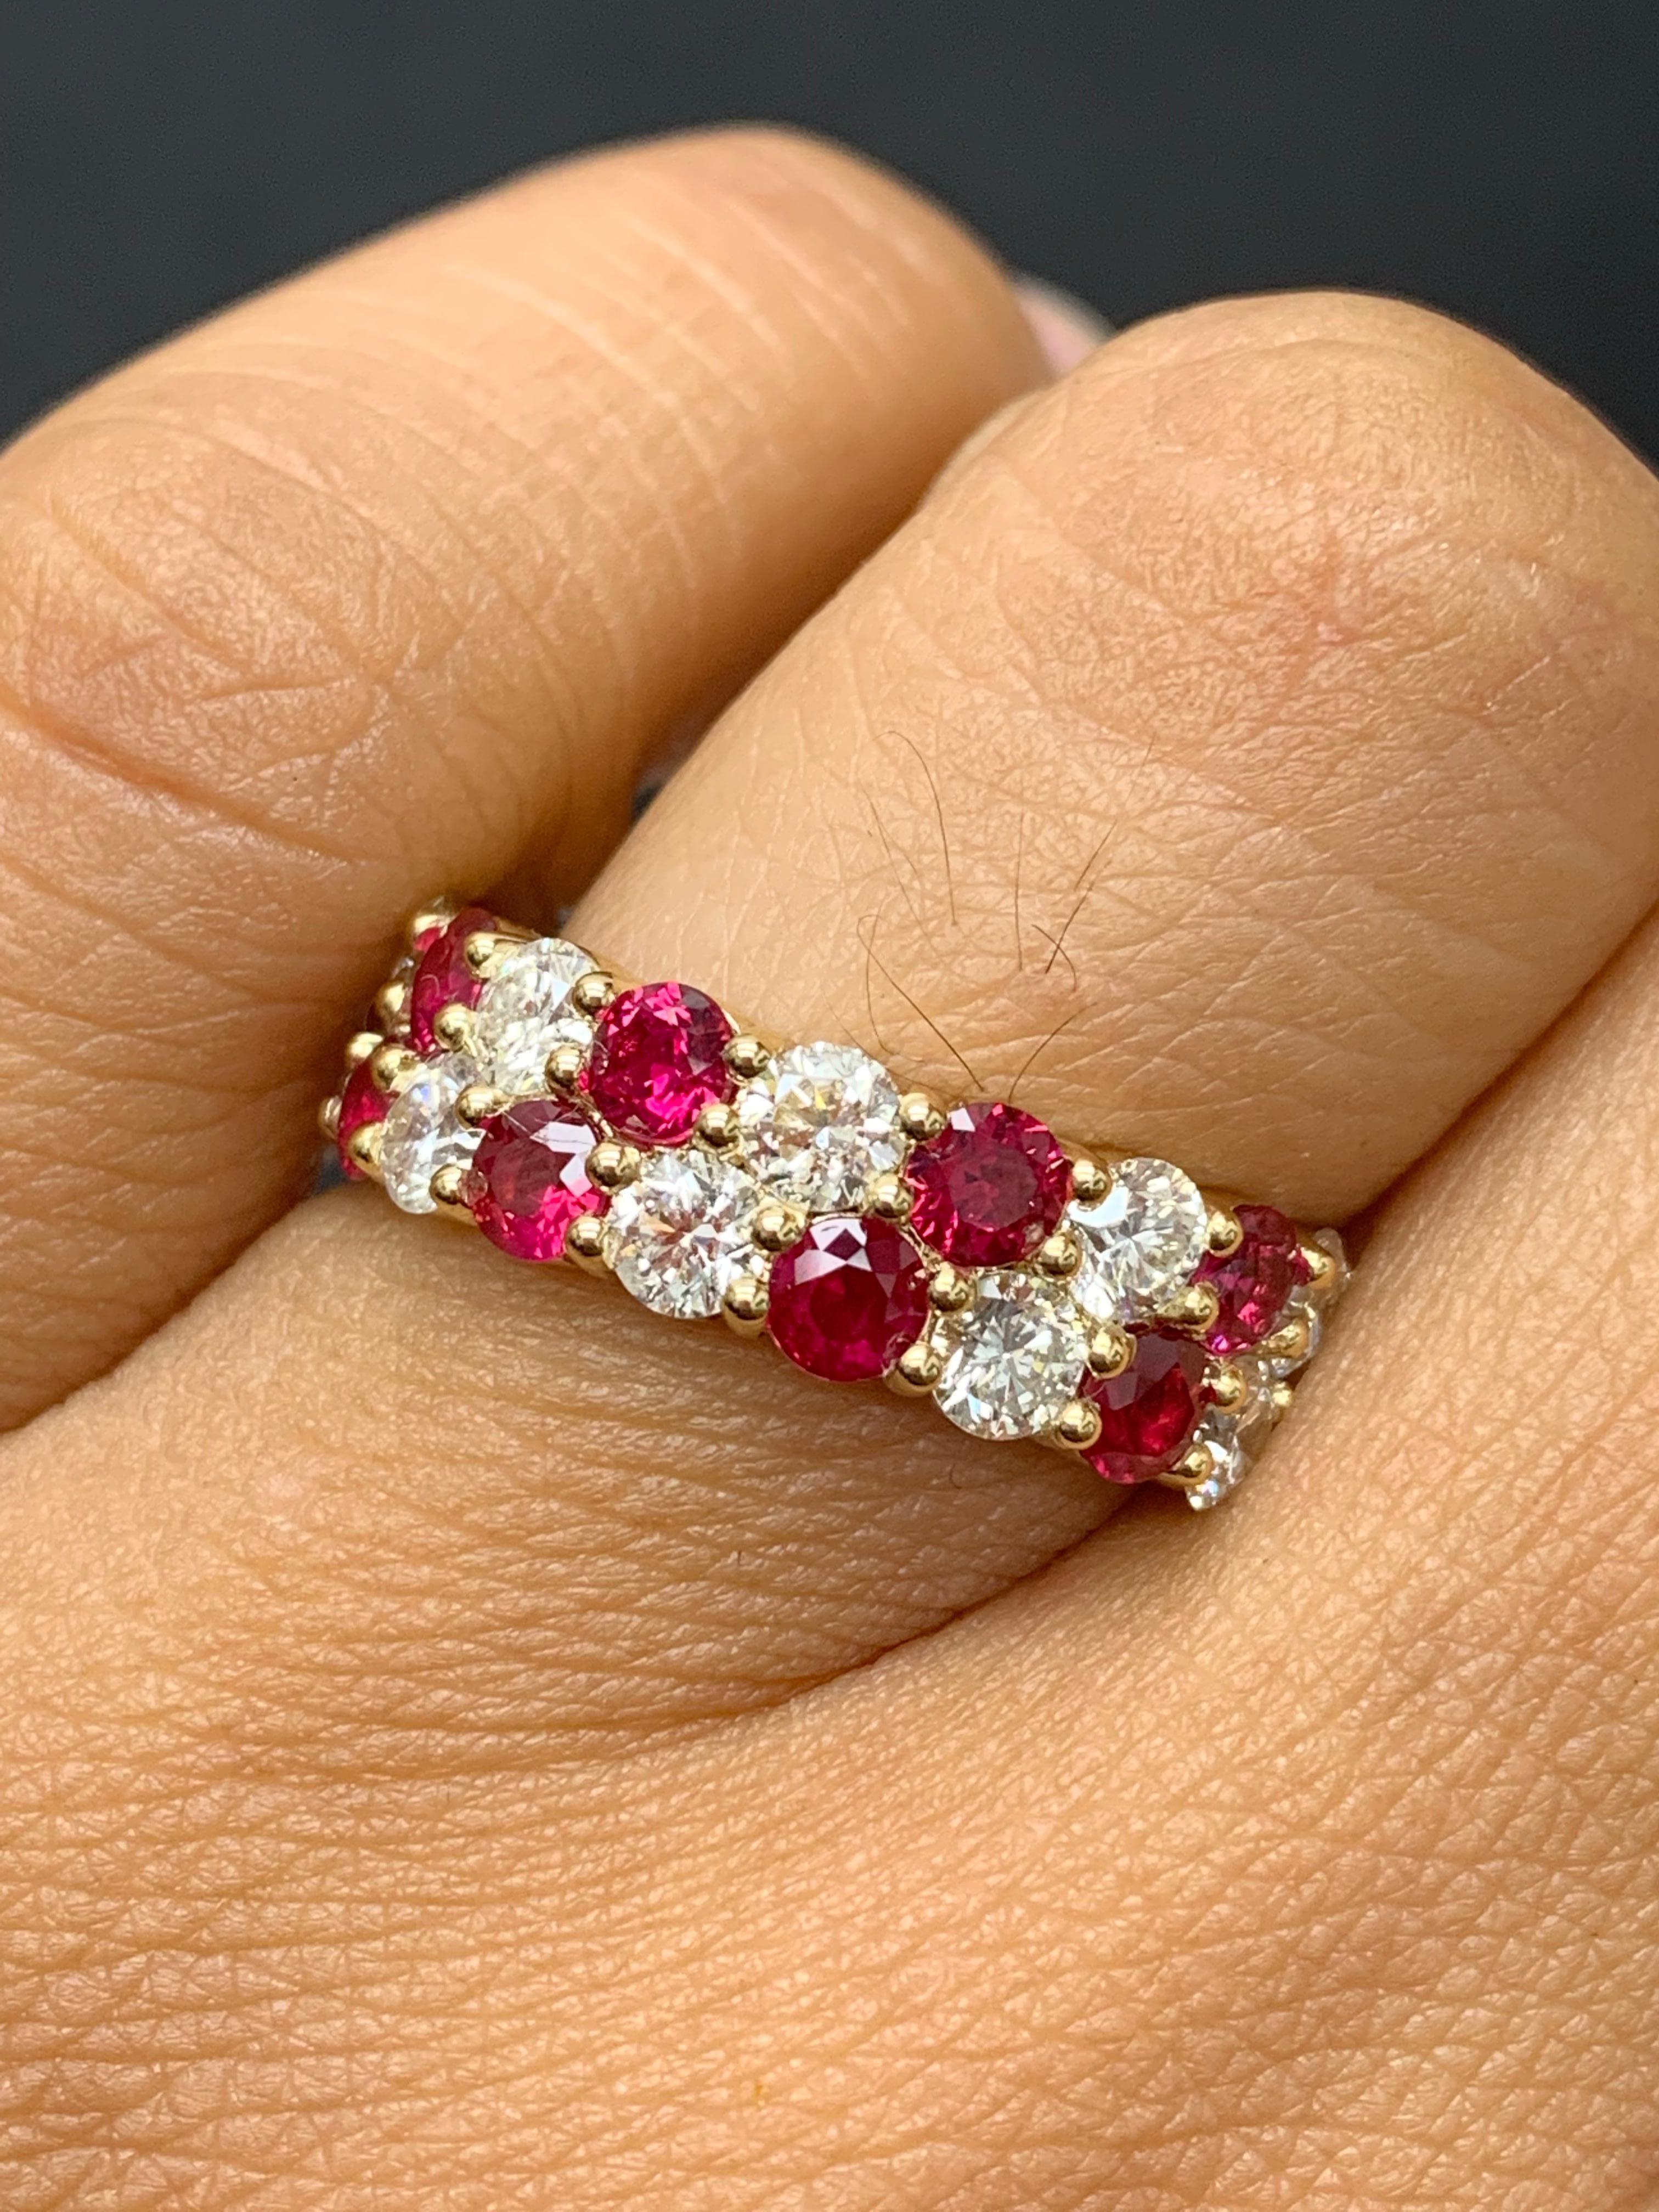 A unique and fashionable ZicZac ring showcasing two rows of round-shape 10 rubies and 9 diamonds, set in a band design. Rubies weigh 1.66 carats and Diamonds weigh 1.52 carats total. A brilliant and masterfully-made piece.

Style available in